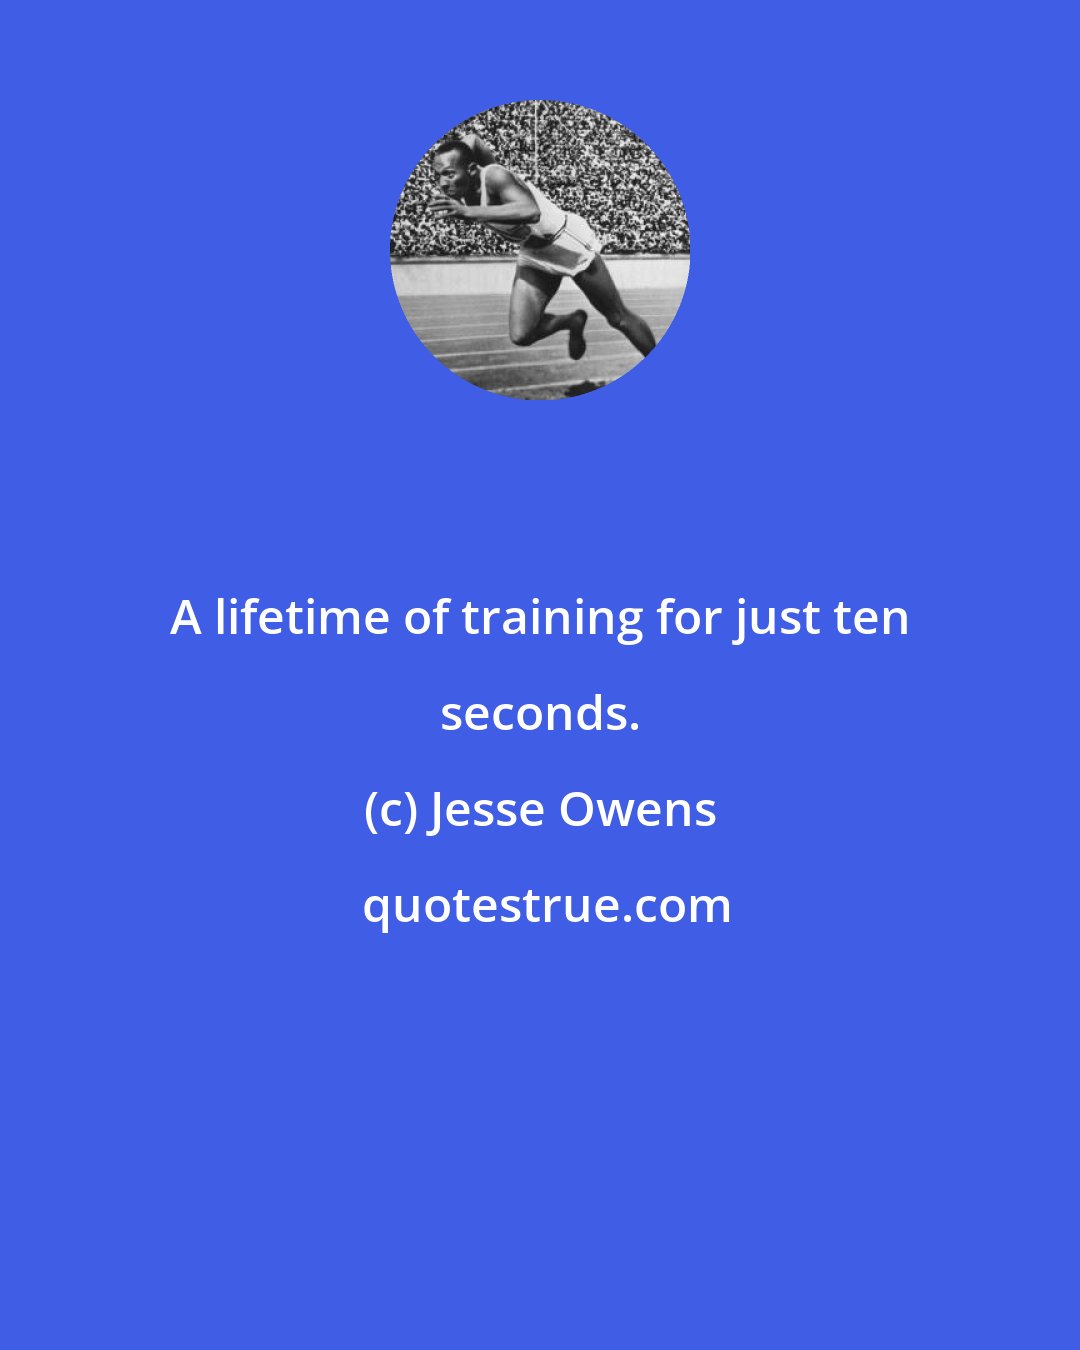 Jesse Owens: A lifetime of training for just ten seconds.